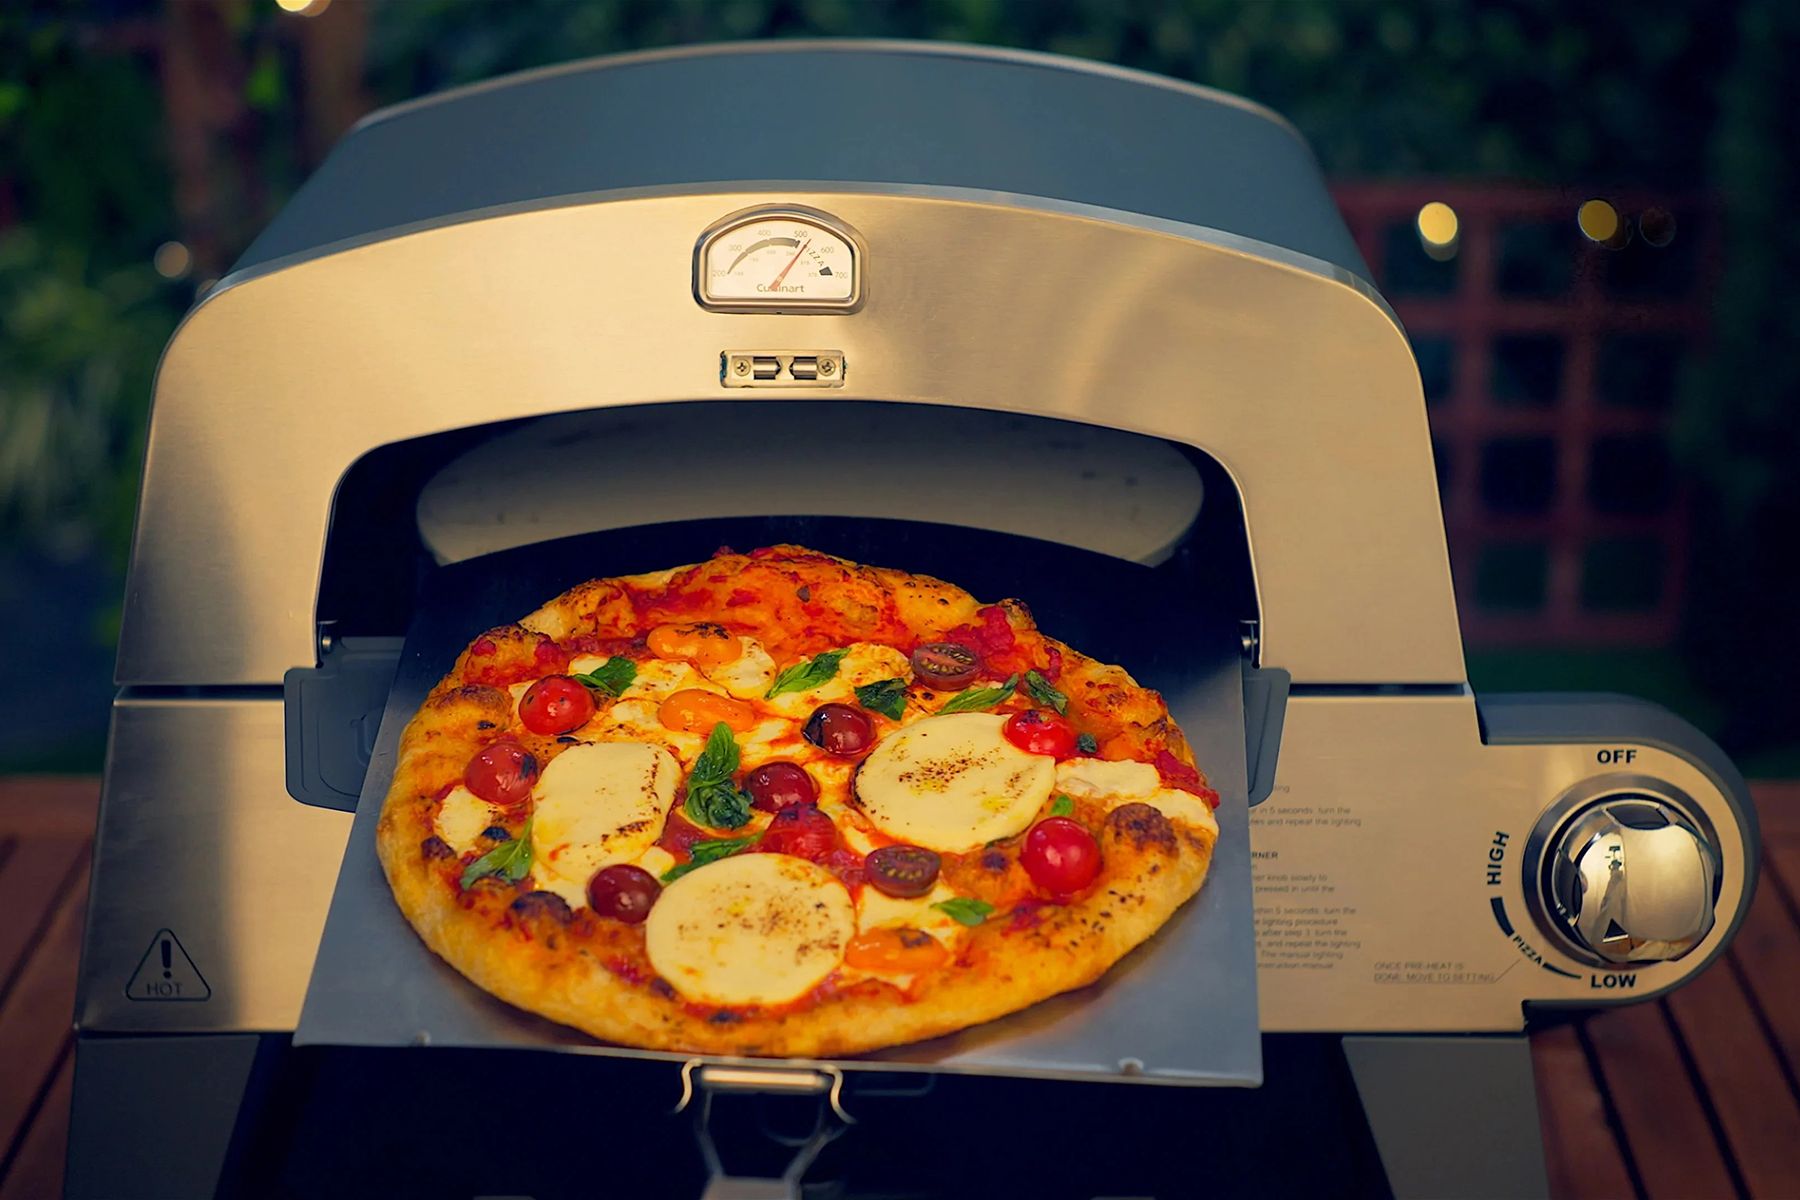 Cuisinart's 3-in-1 Outdoor Pizza Oven Is Off Now, So Don't Miss This Amazing Deal